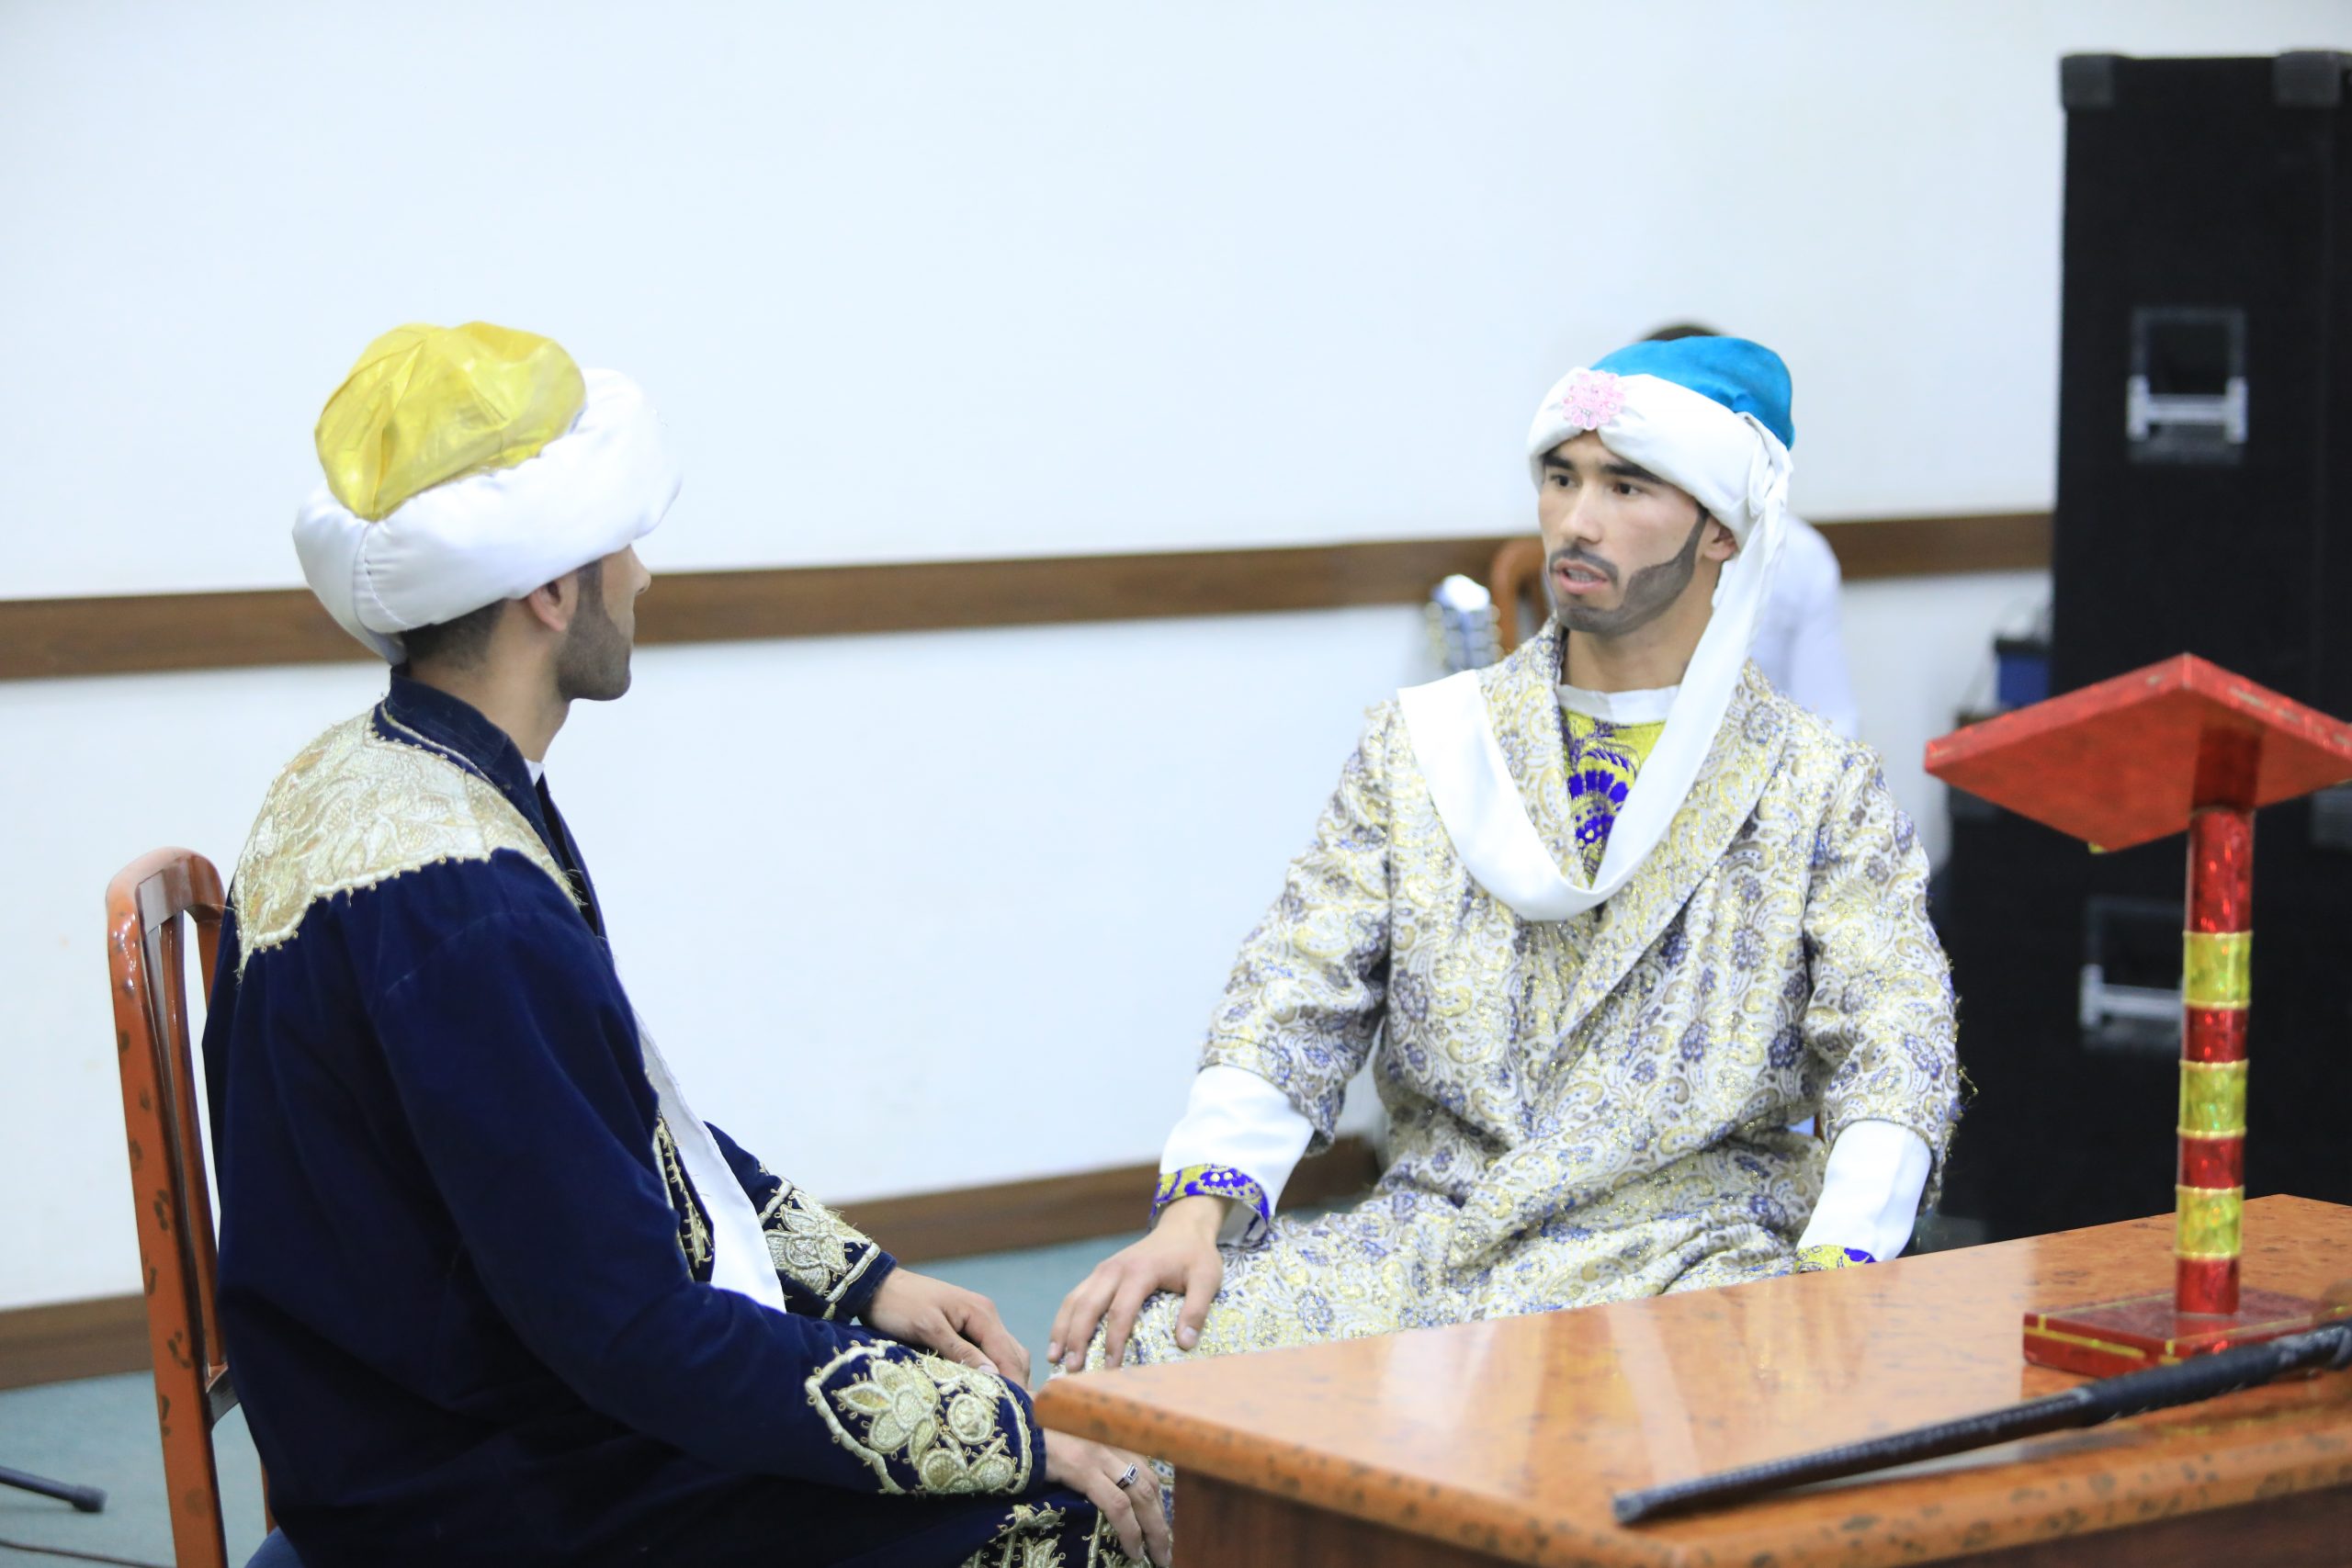 EVENT WAS HELD ON “AMIR TEMUR – A SYMBOL OF OUR SPIRITUAL POWER”.